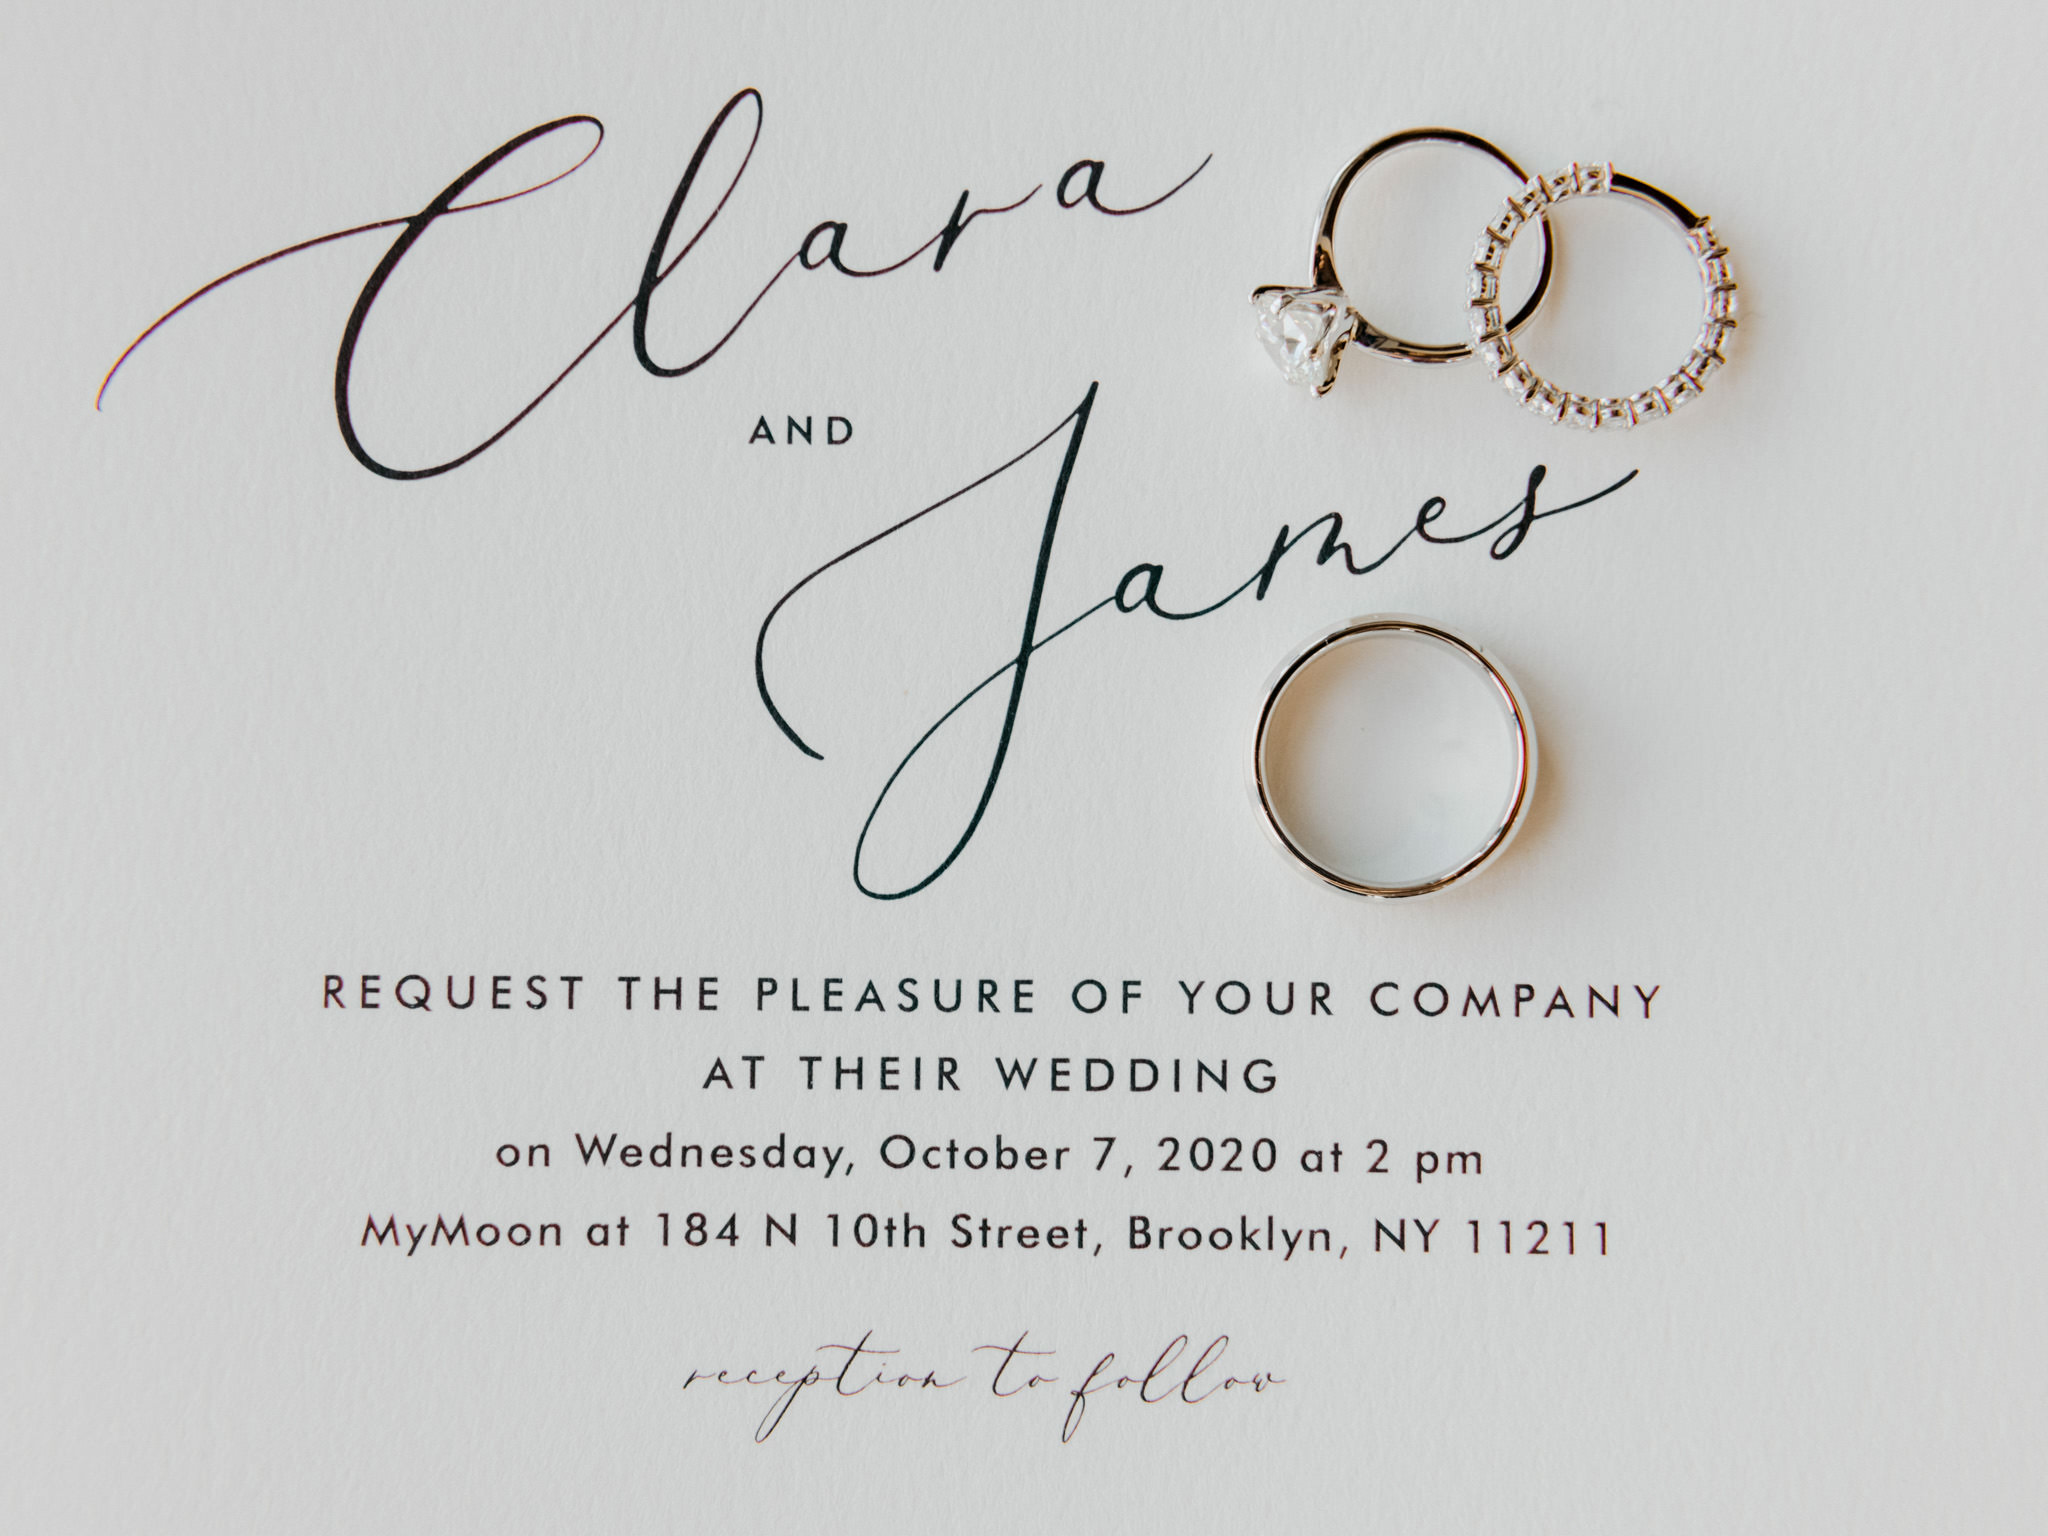 Invitation stating ceremony and reception details for guests